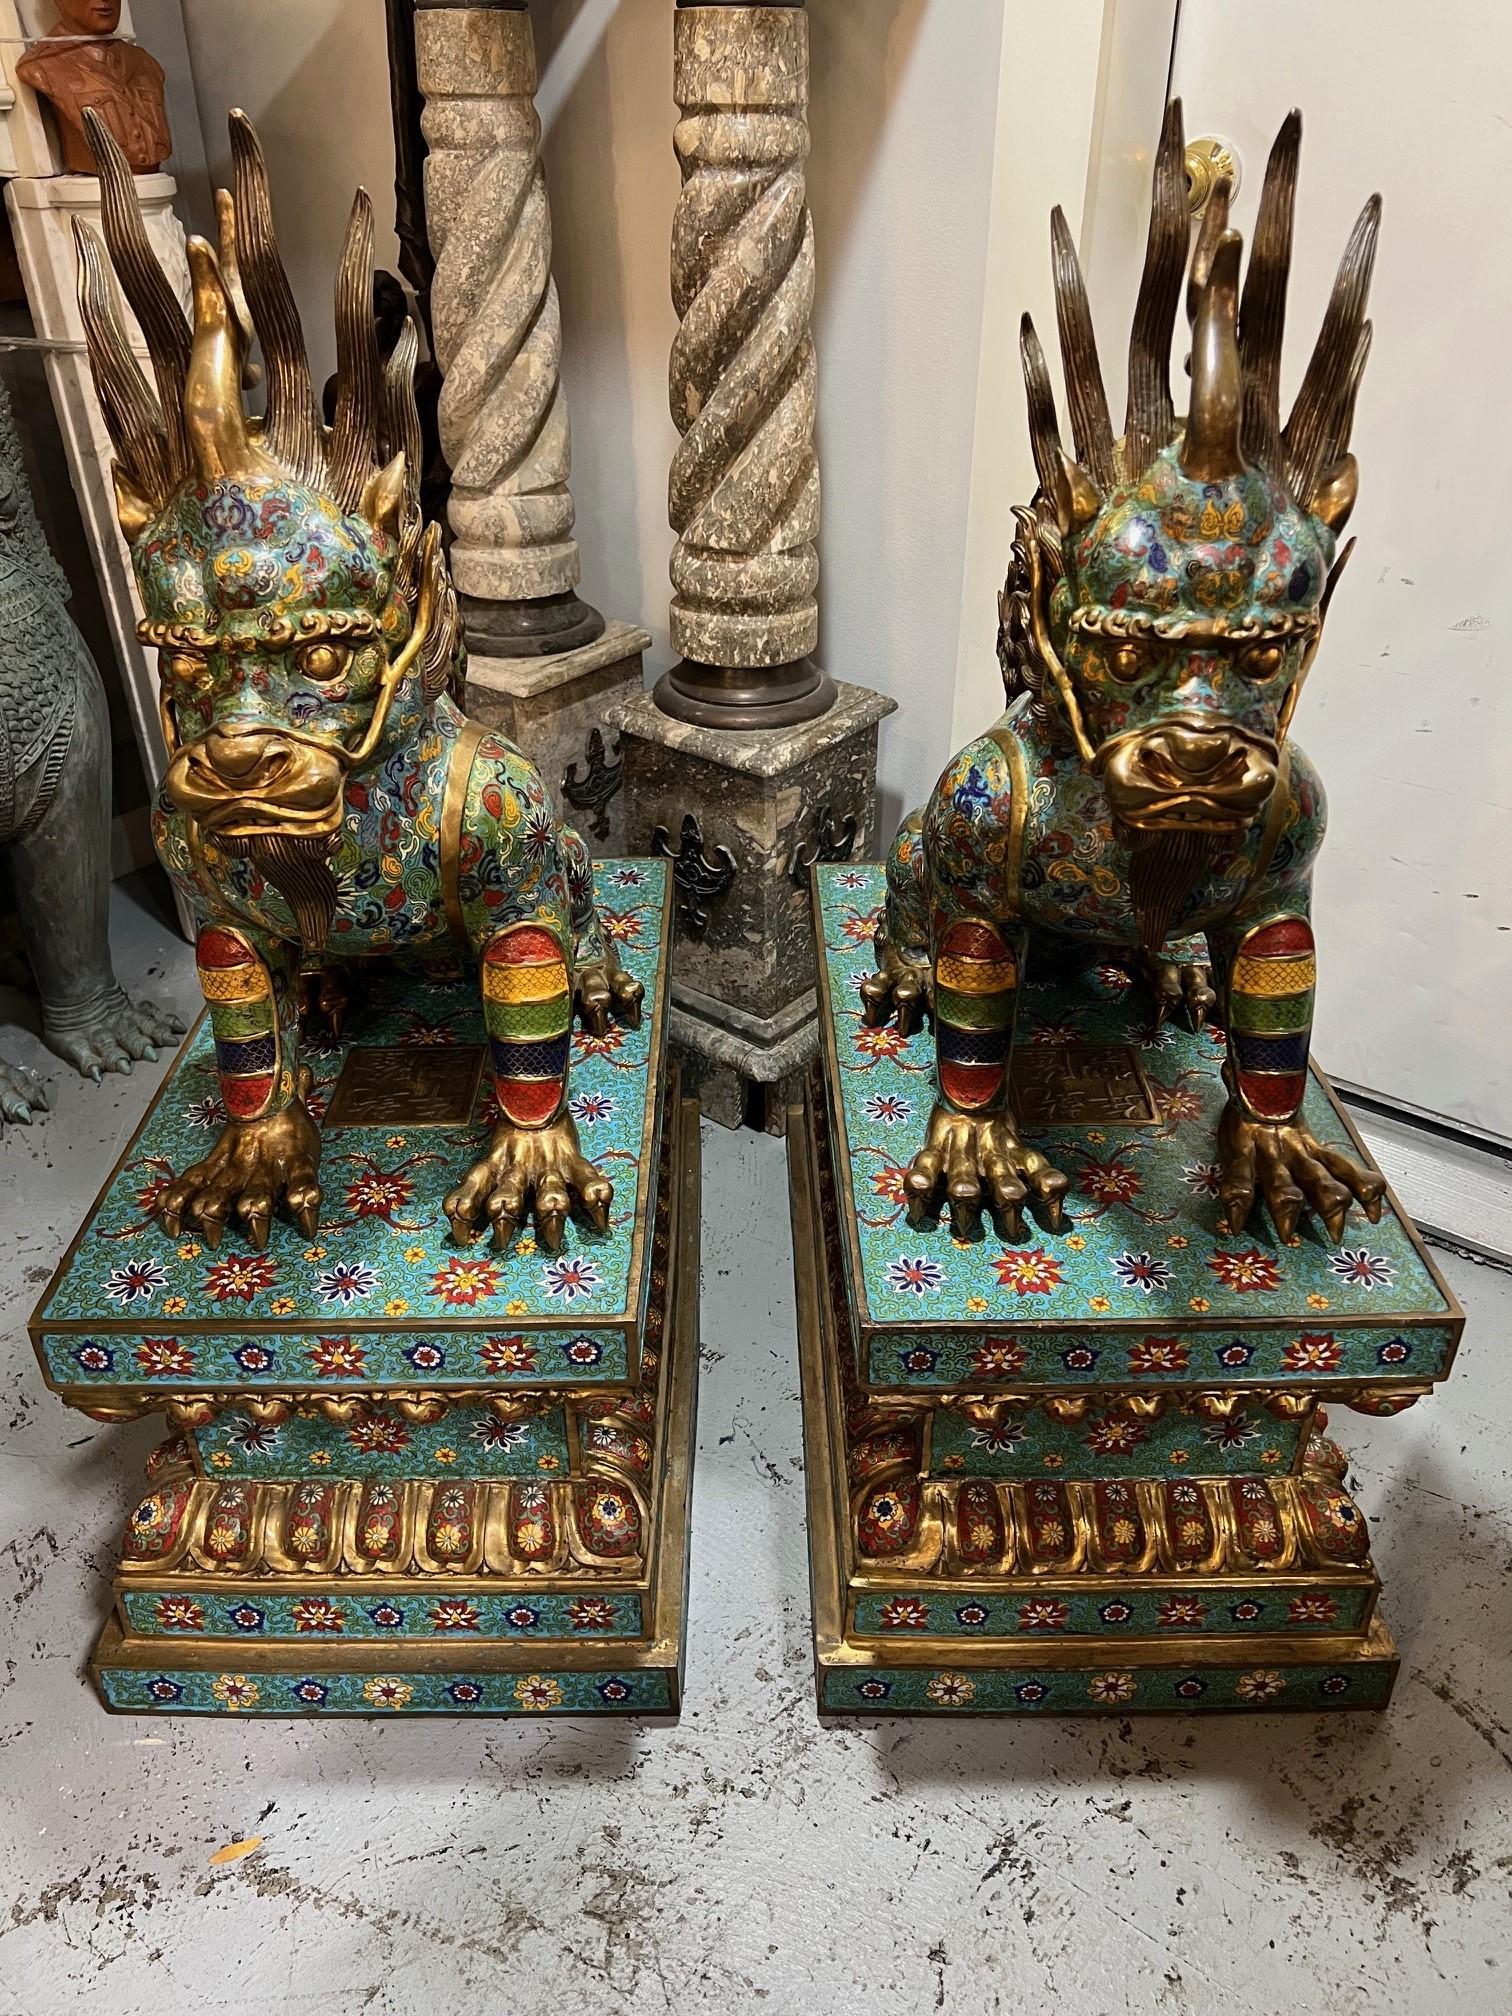 A massive pair of Chinese cloisonne enamel foo dogs / lions mid 20th century. Very fine quality enameling throughout. it is a majestically hand-crafted works of art in Museum quality that is sure to capture everyone’s attention. Very beautiful. A